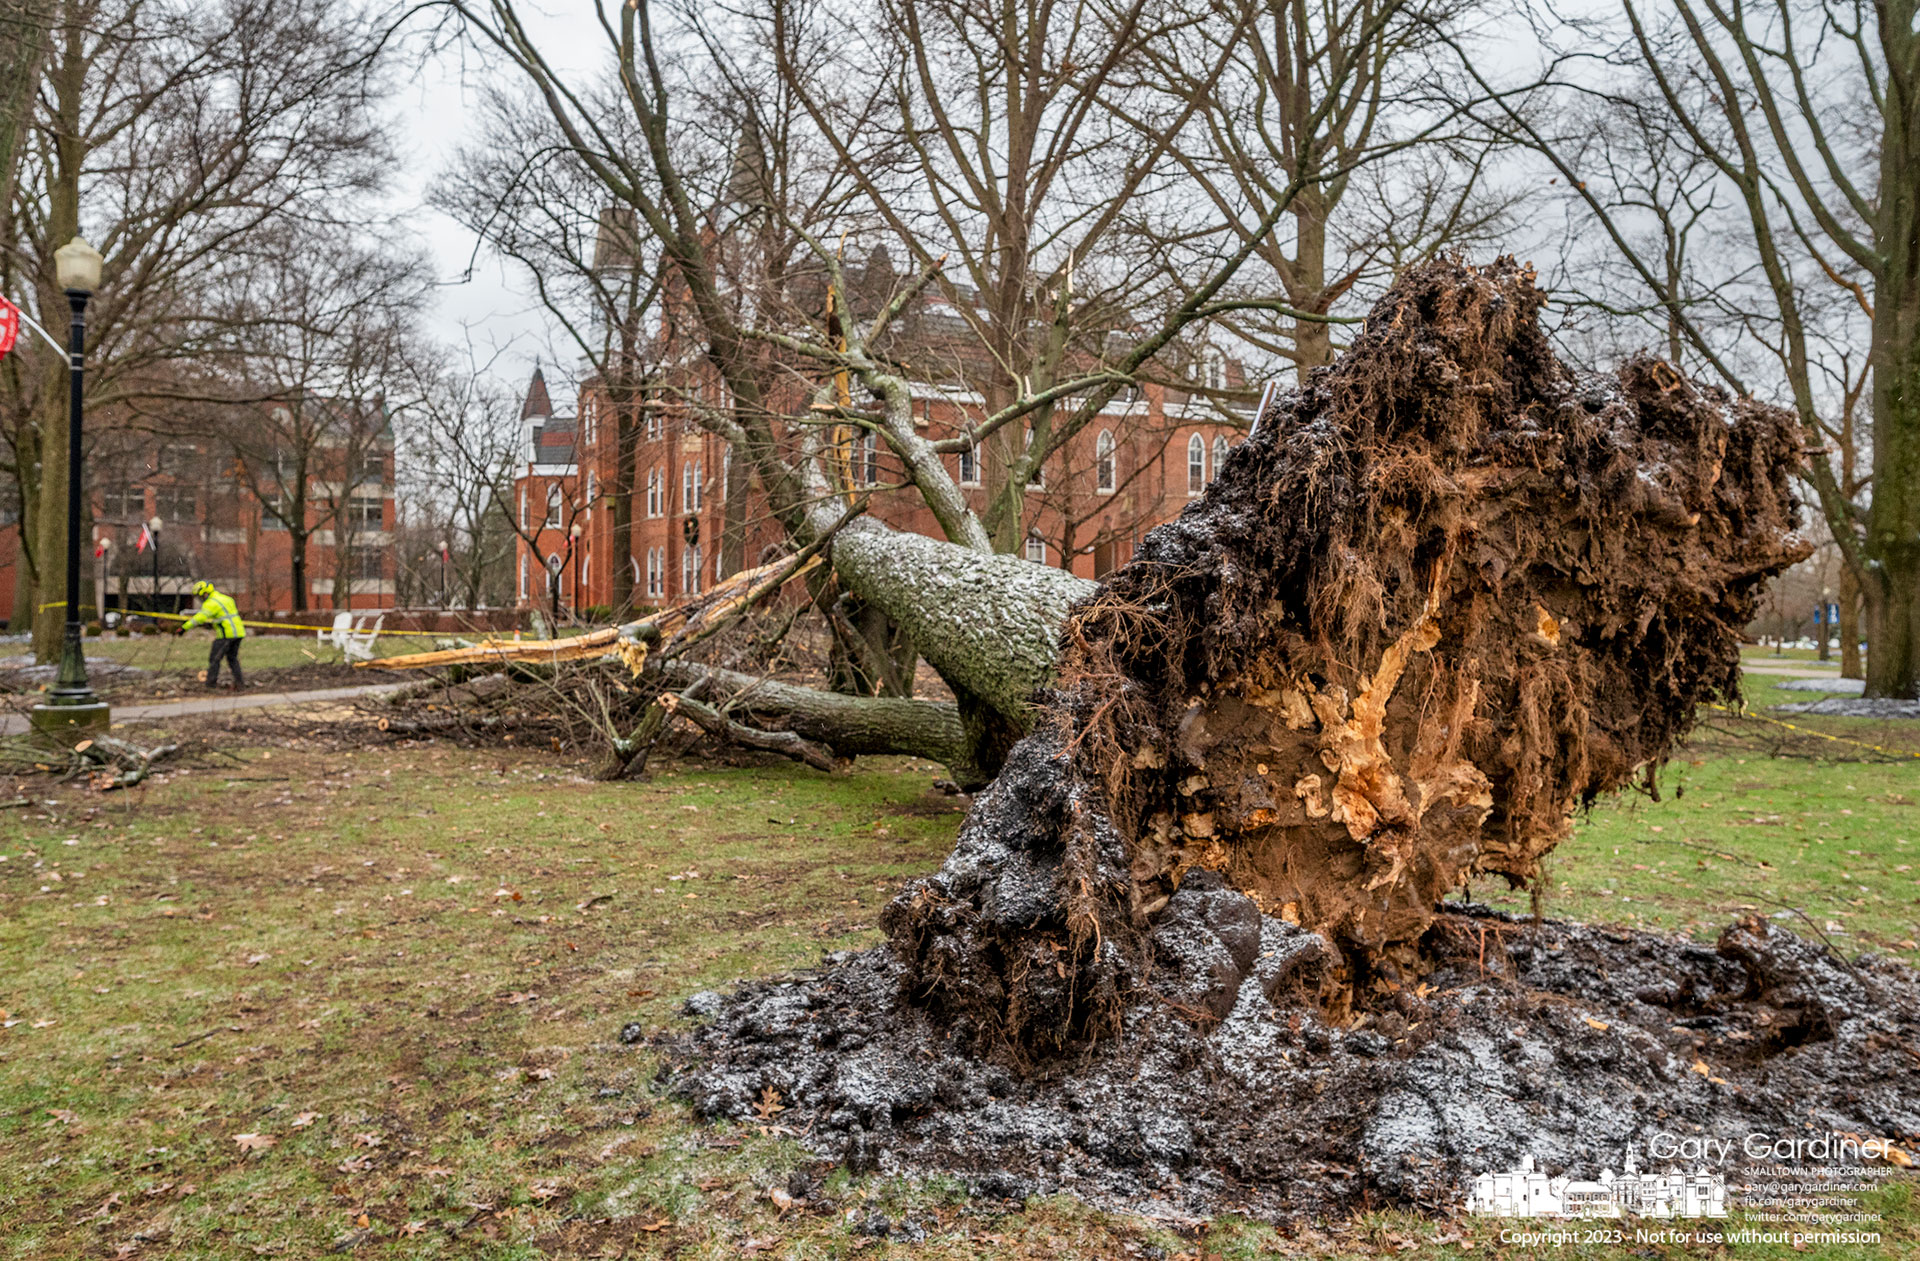 A tree removal crew works to remove a large maple tree with its rotten roots exposed near Towers Hall on Otterbein University after it fell during storms the previous day. My Final Photo for January 13, 2023.